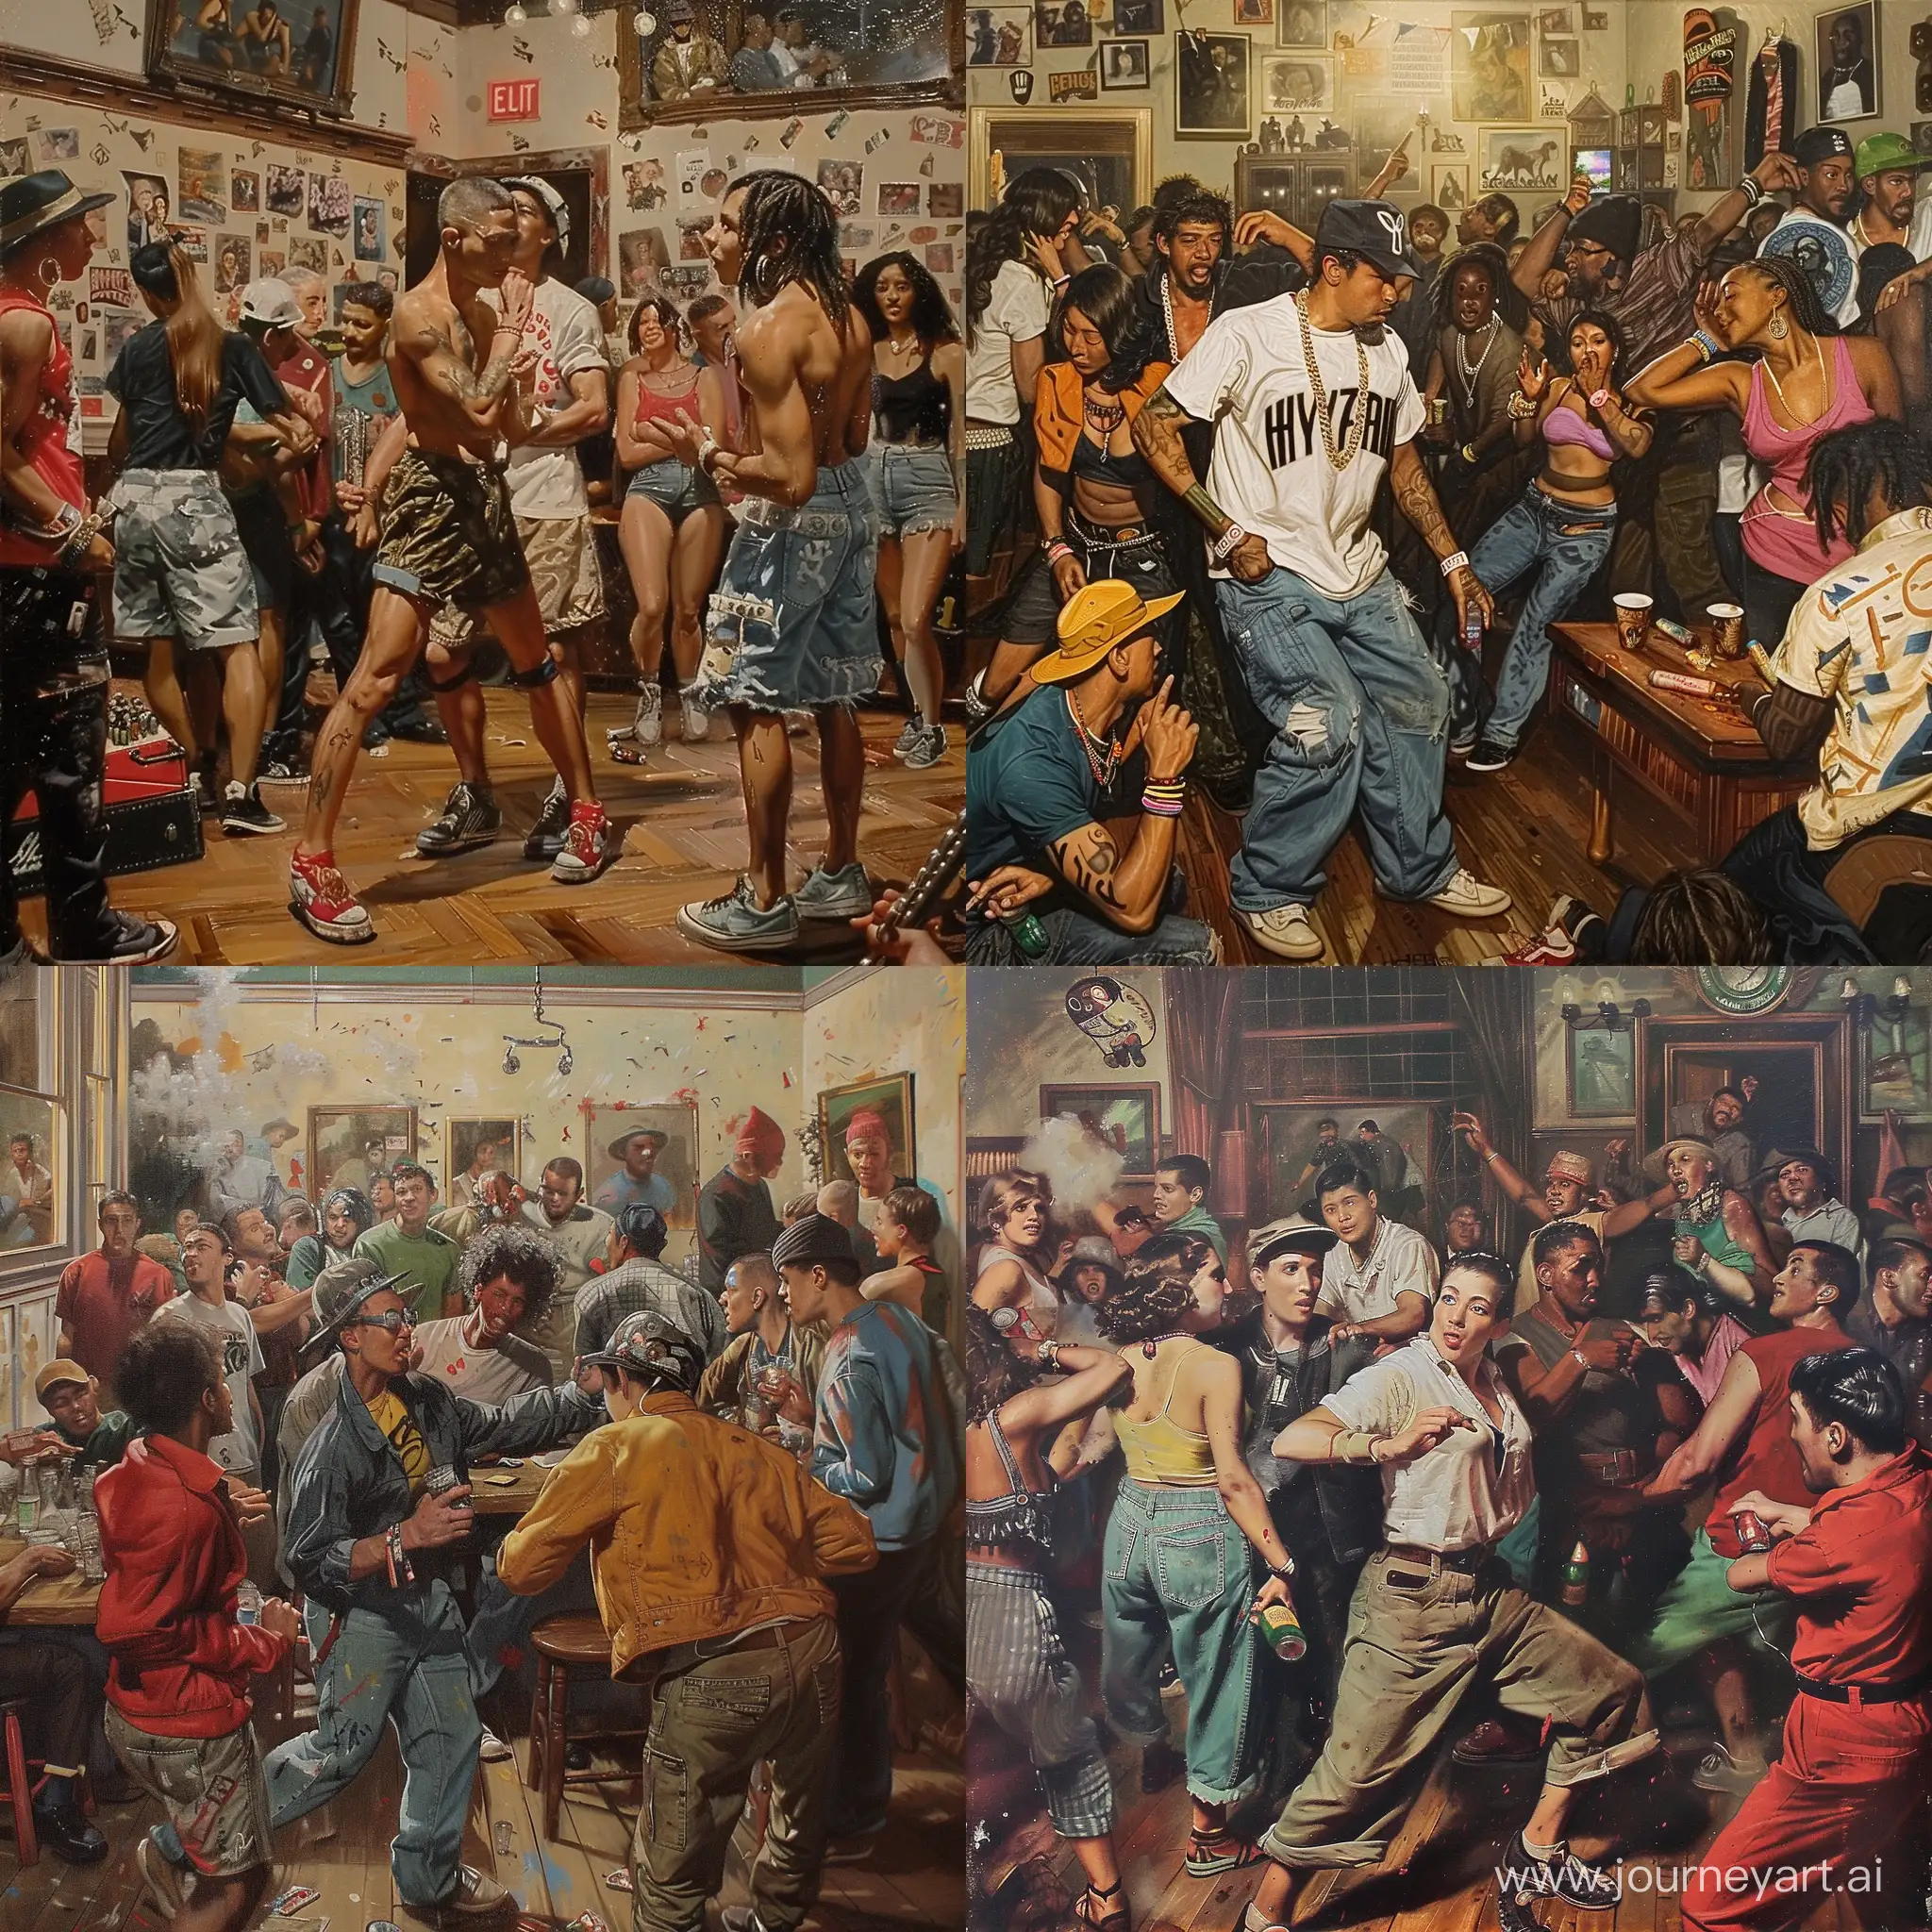 A hyphy party in san francisco in the style of norman rockwell painting